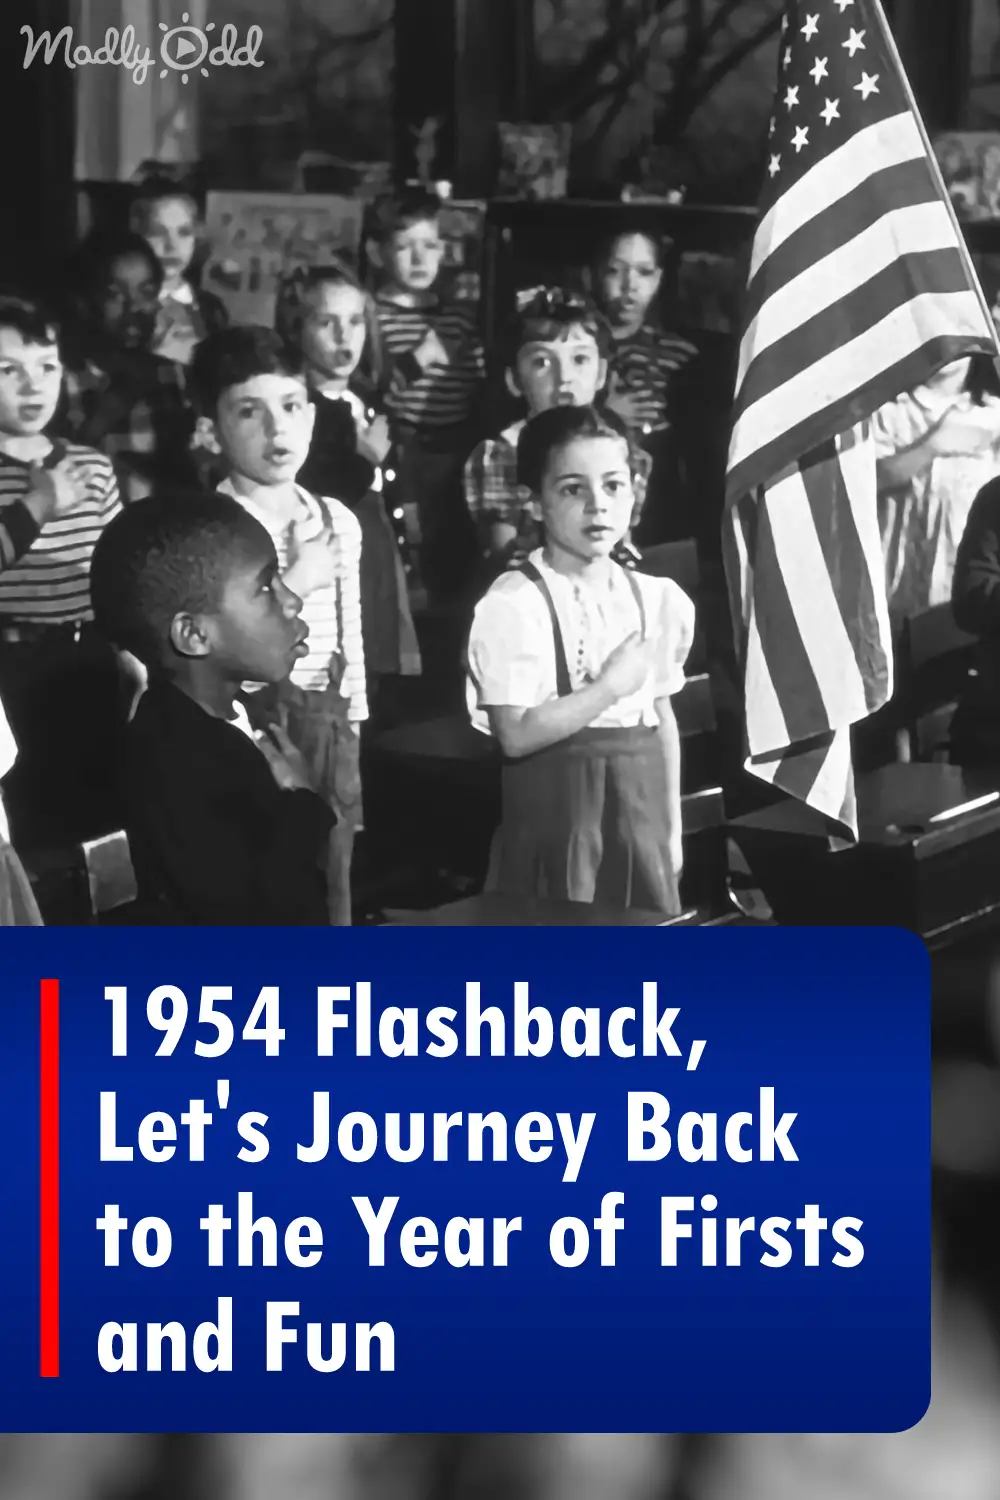 1954 Flashback, Let's Journey Back to the Year of Firsts and Fun